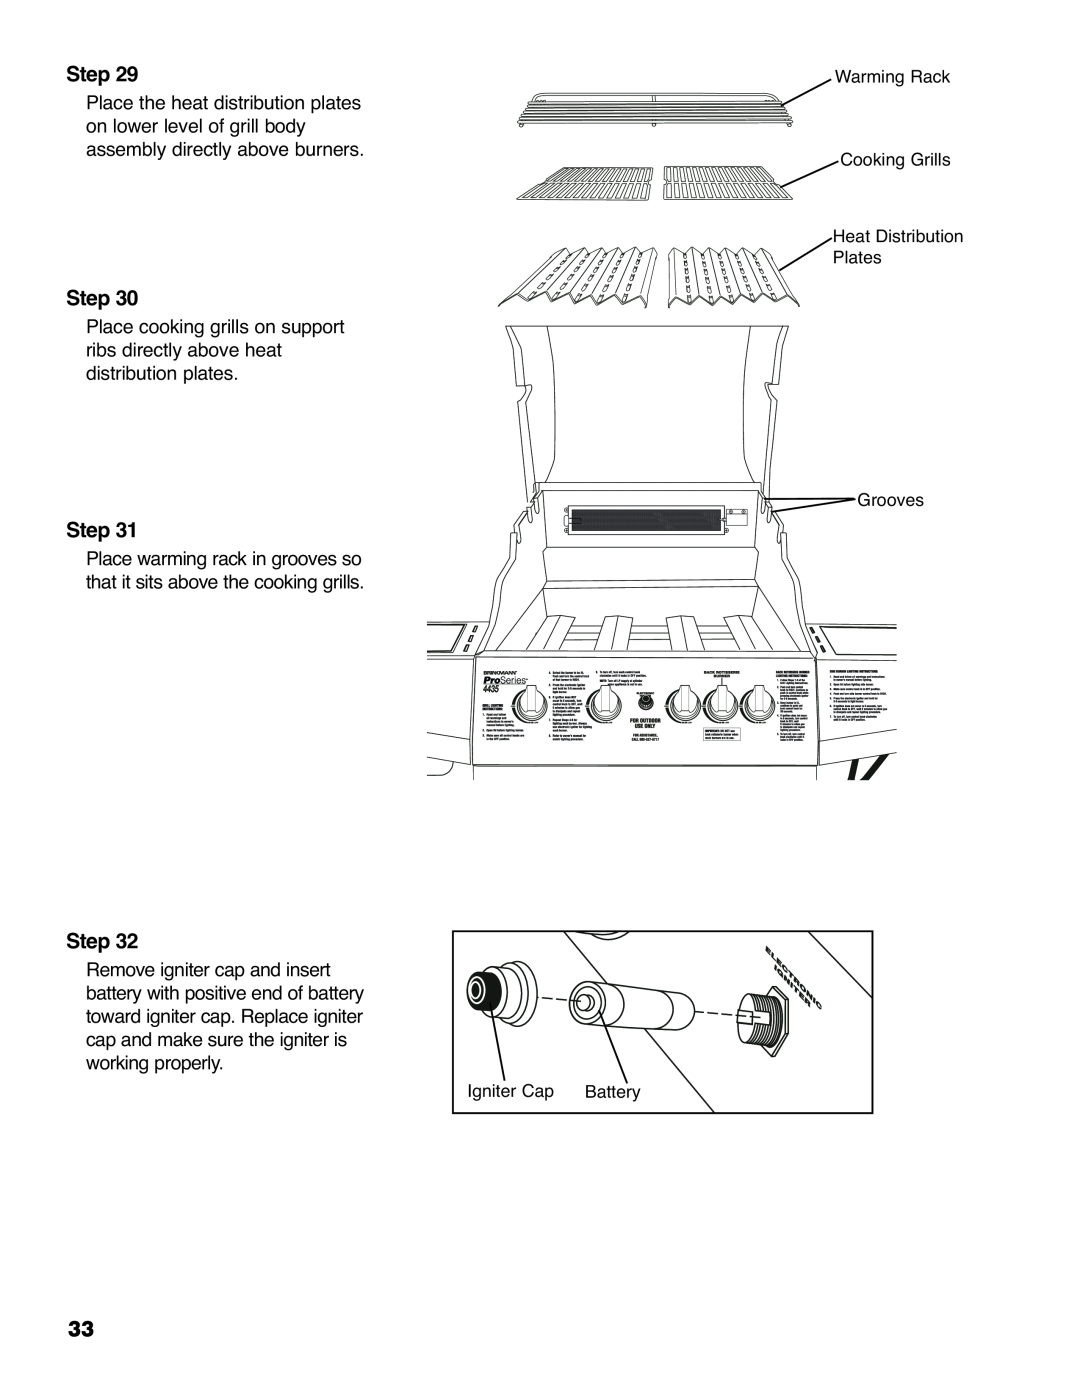 Brinkmann ProSeries 4435 owner manual Step, Place warming rack in grooves so that it sits above the cooking grills 